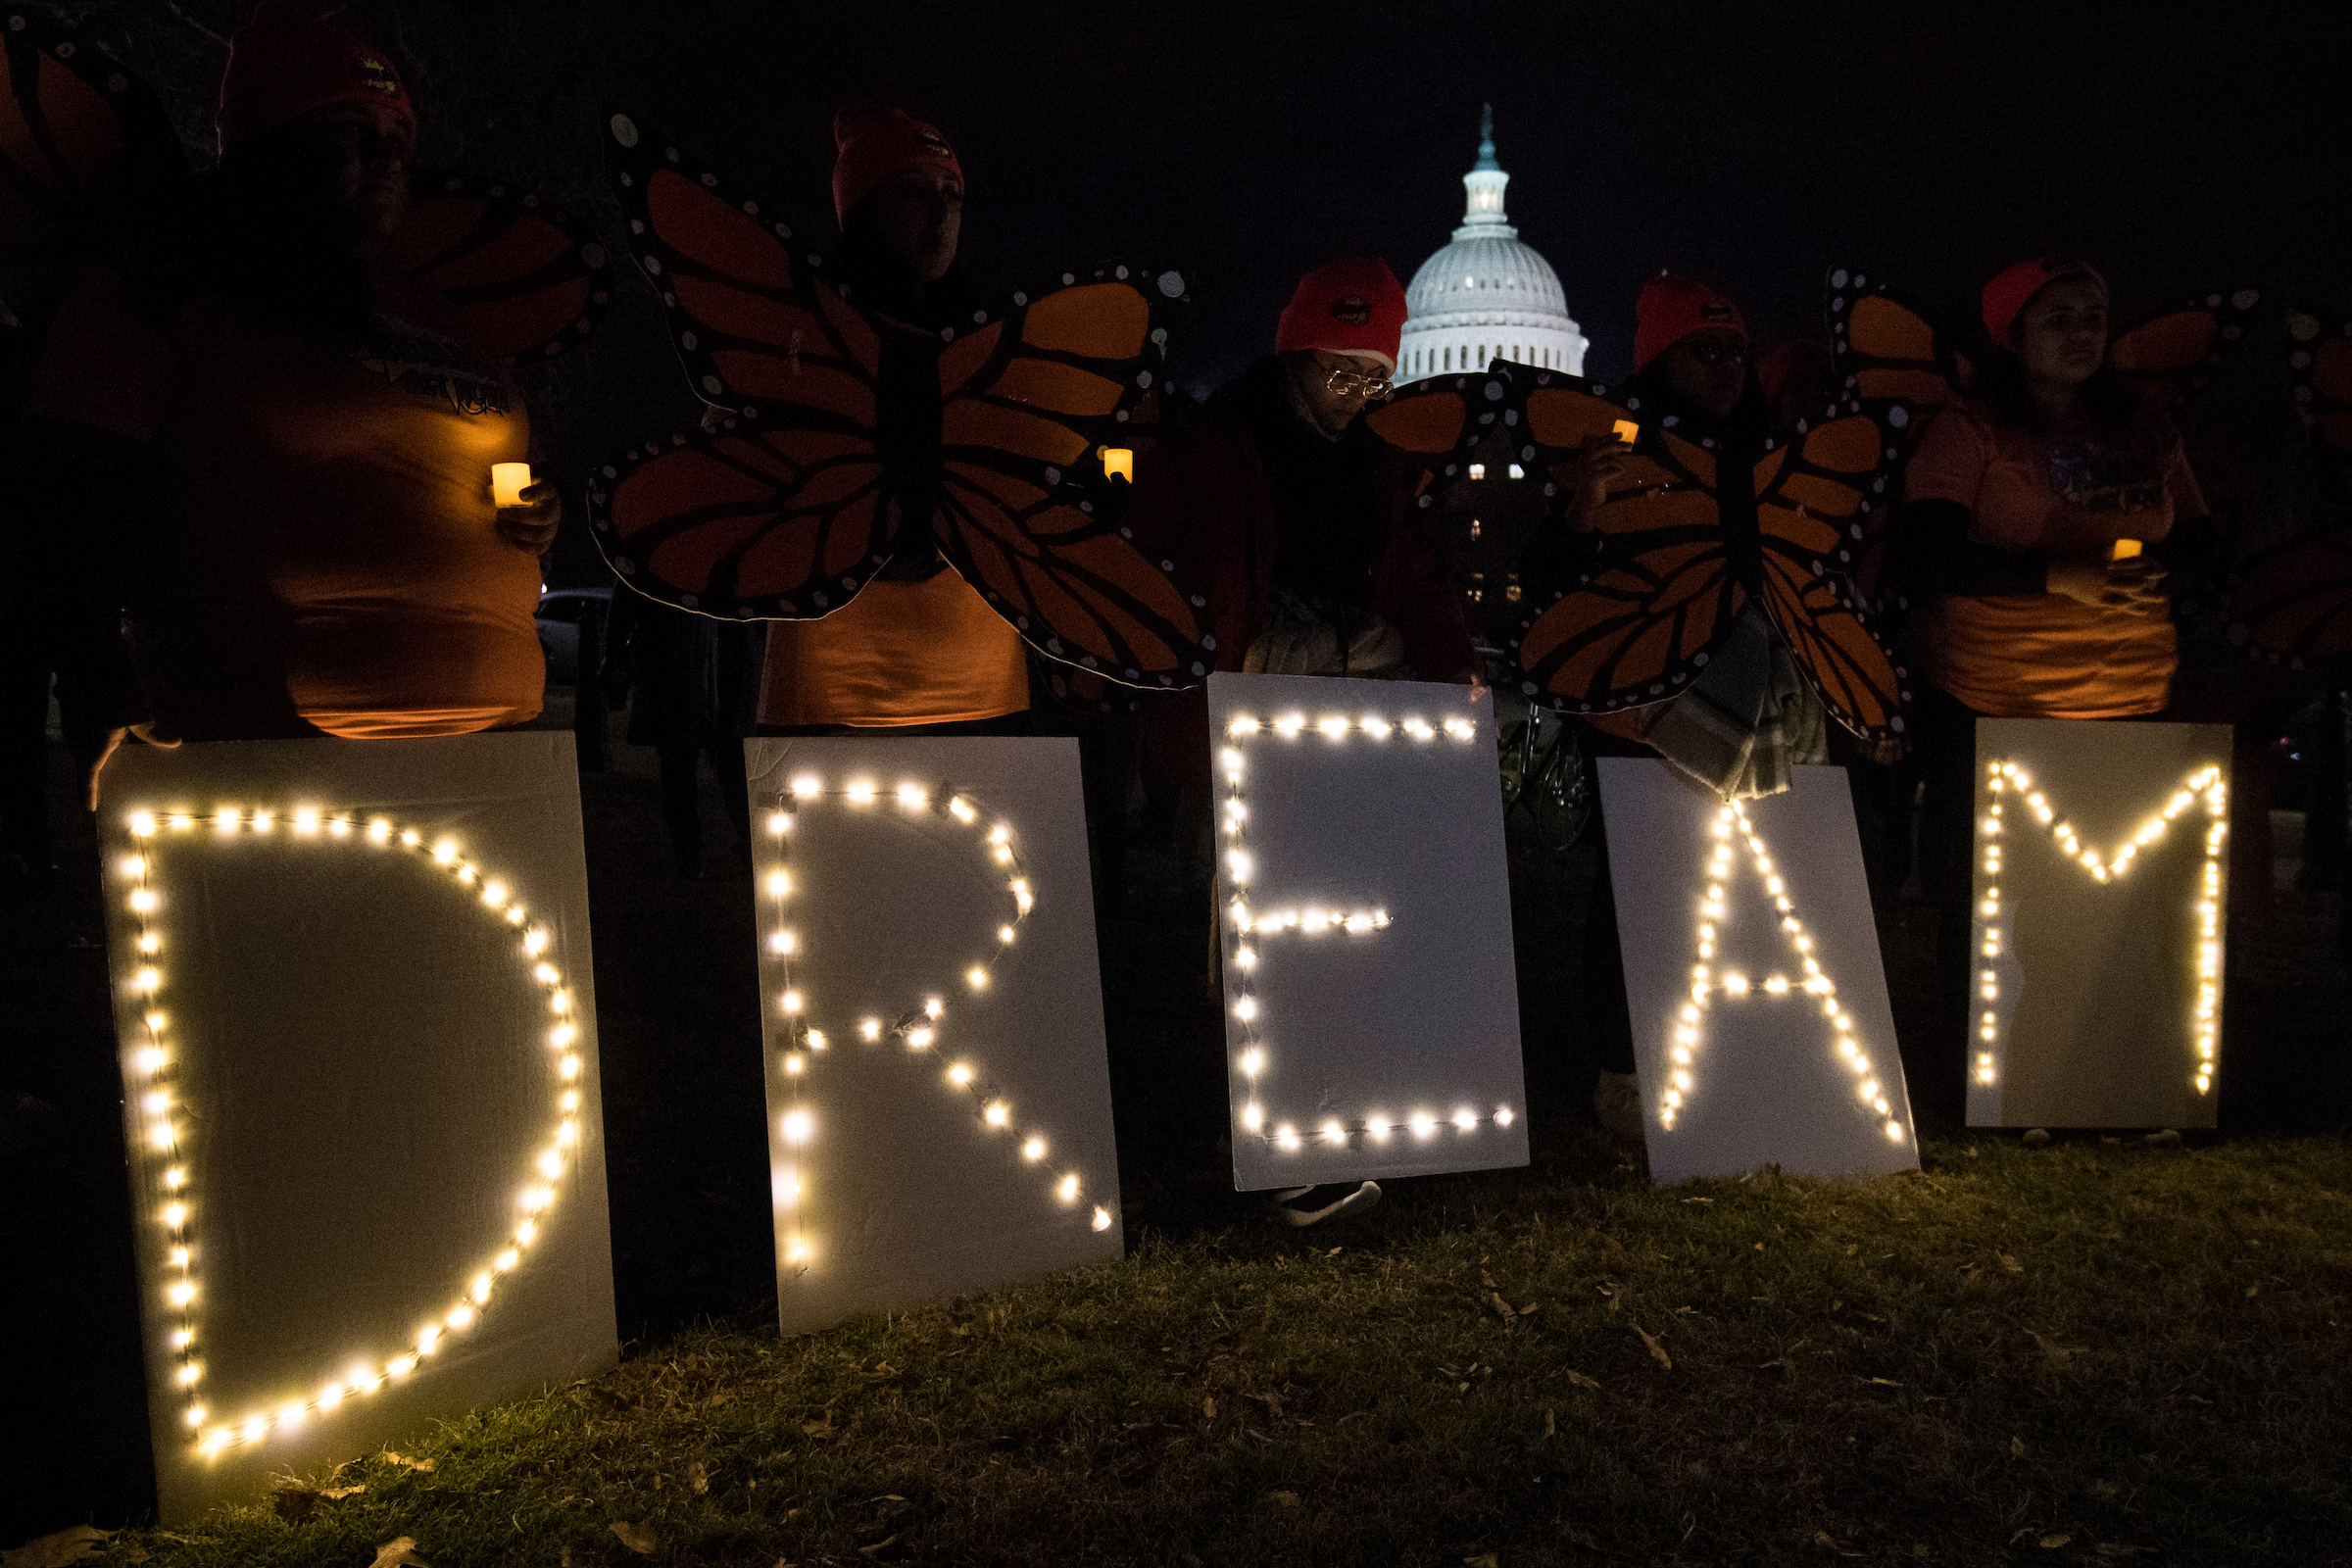 Stop playing politics with DACA, pass a permanent solution by Congress